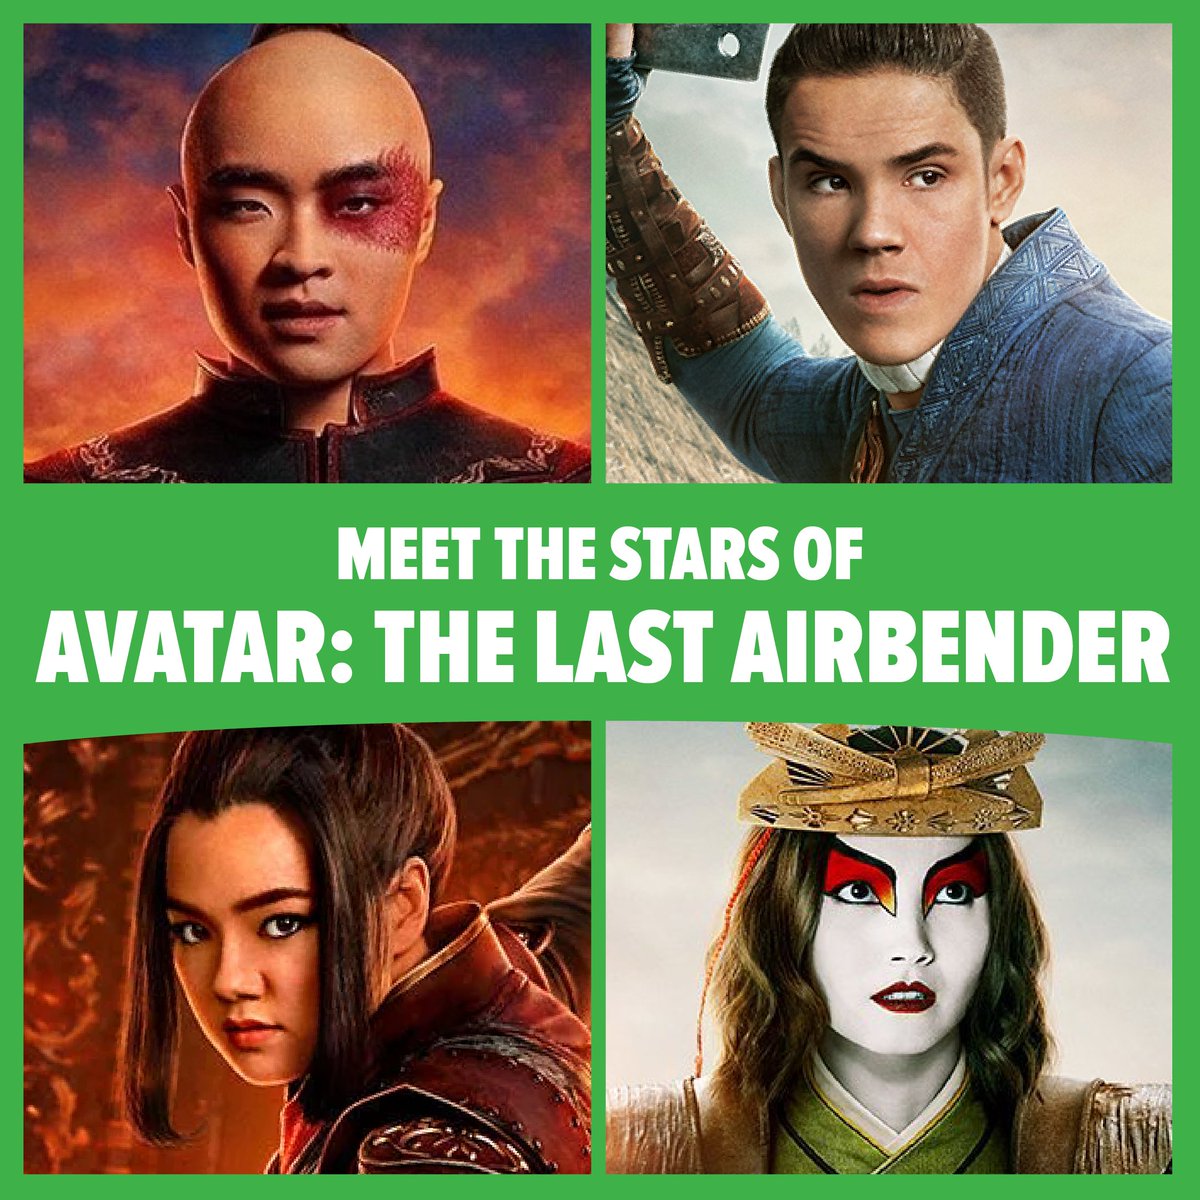 Your training arc begins now. Meet Dallas Liu (Zuko), Ian Ousley (Sokka), Elizabeth Yu (Azula), and Maria Zhang (Suki) from Netflix's Avatar: The Last Airbender at FAN EXPO Philadelphia next month. Tickets are on sale now. spr.ly/6016wU8HC